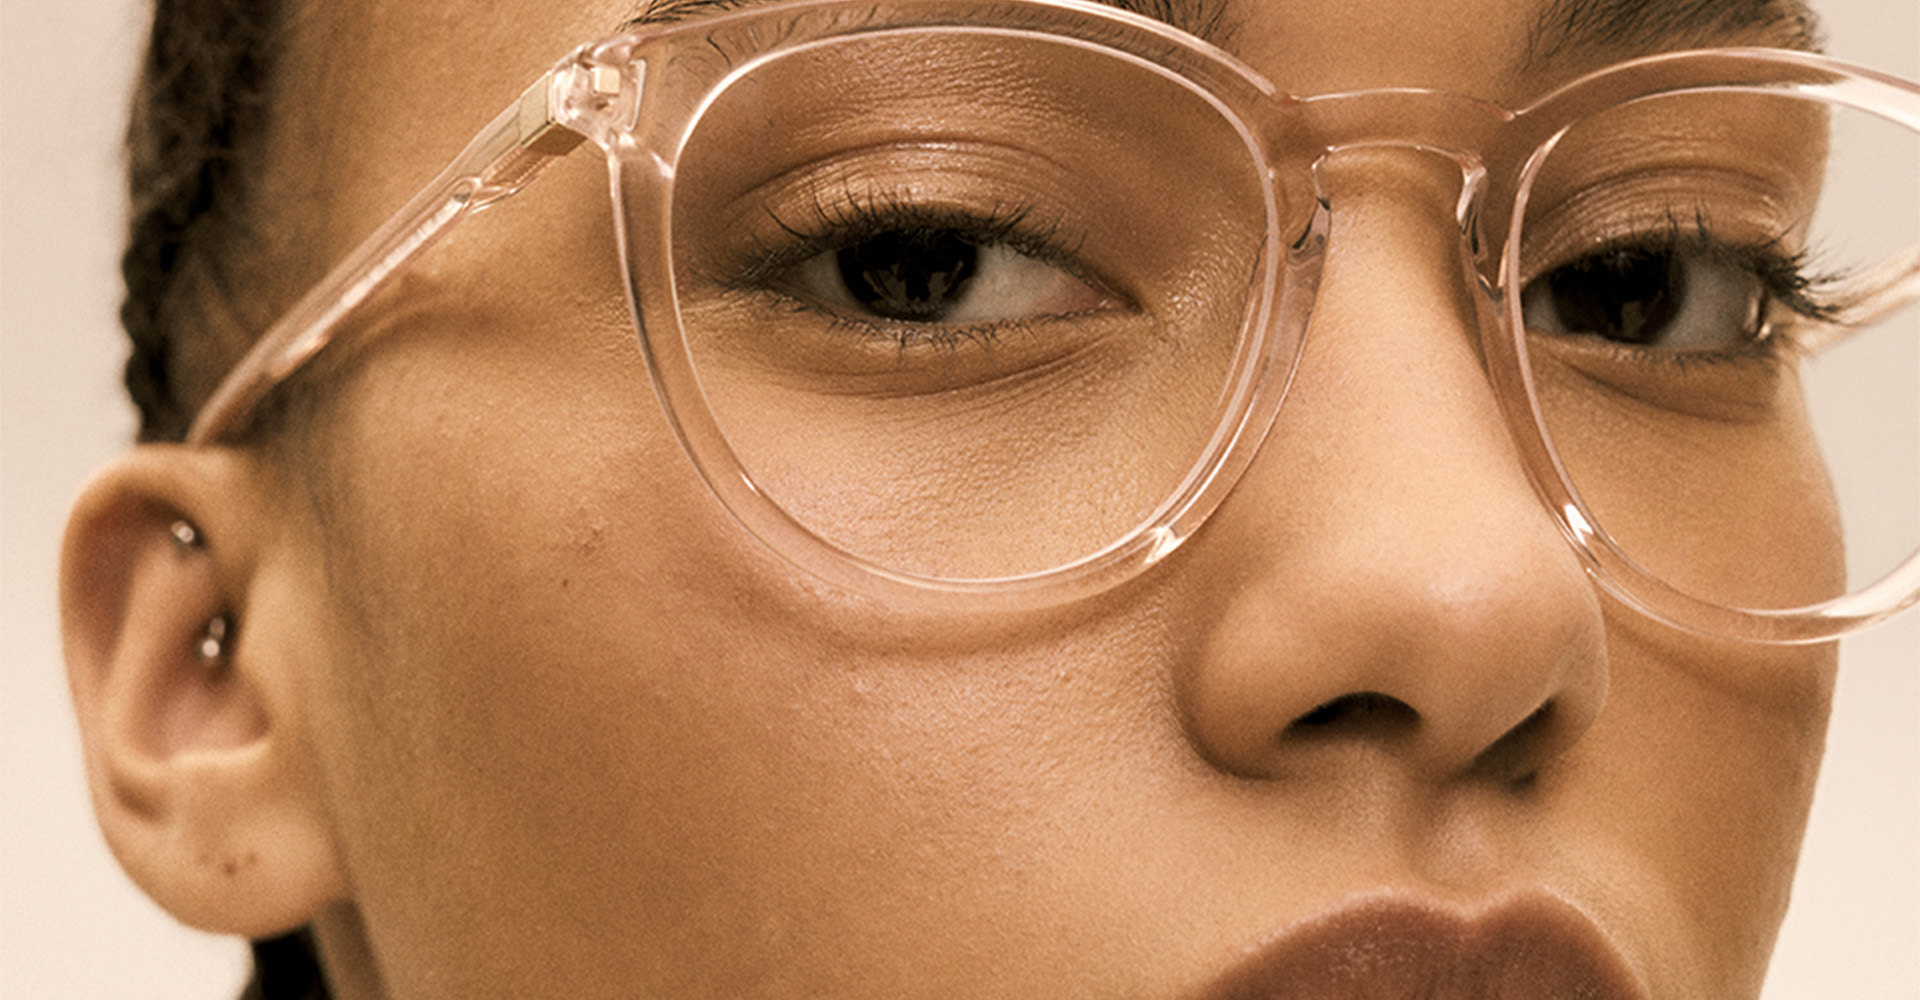 MYKITA ACETATE is a comprehensive acetate eyewear collection that beautifully captures the responsible design ethos at MYKITA. All frames are made from the sustainable material Eastman Acetate Renew.